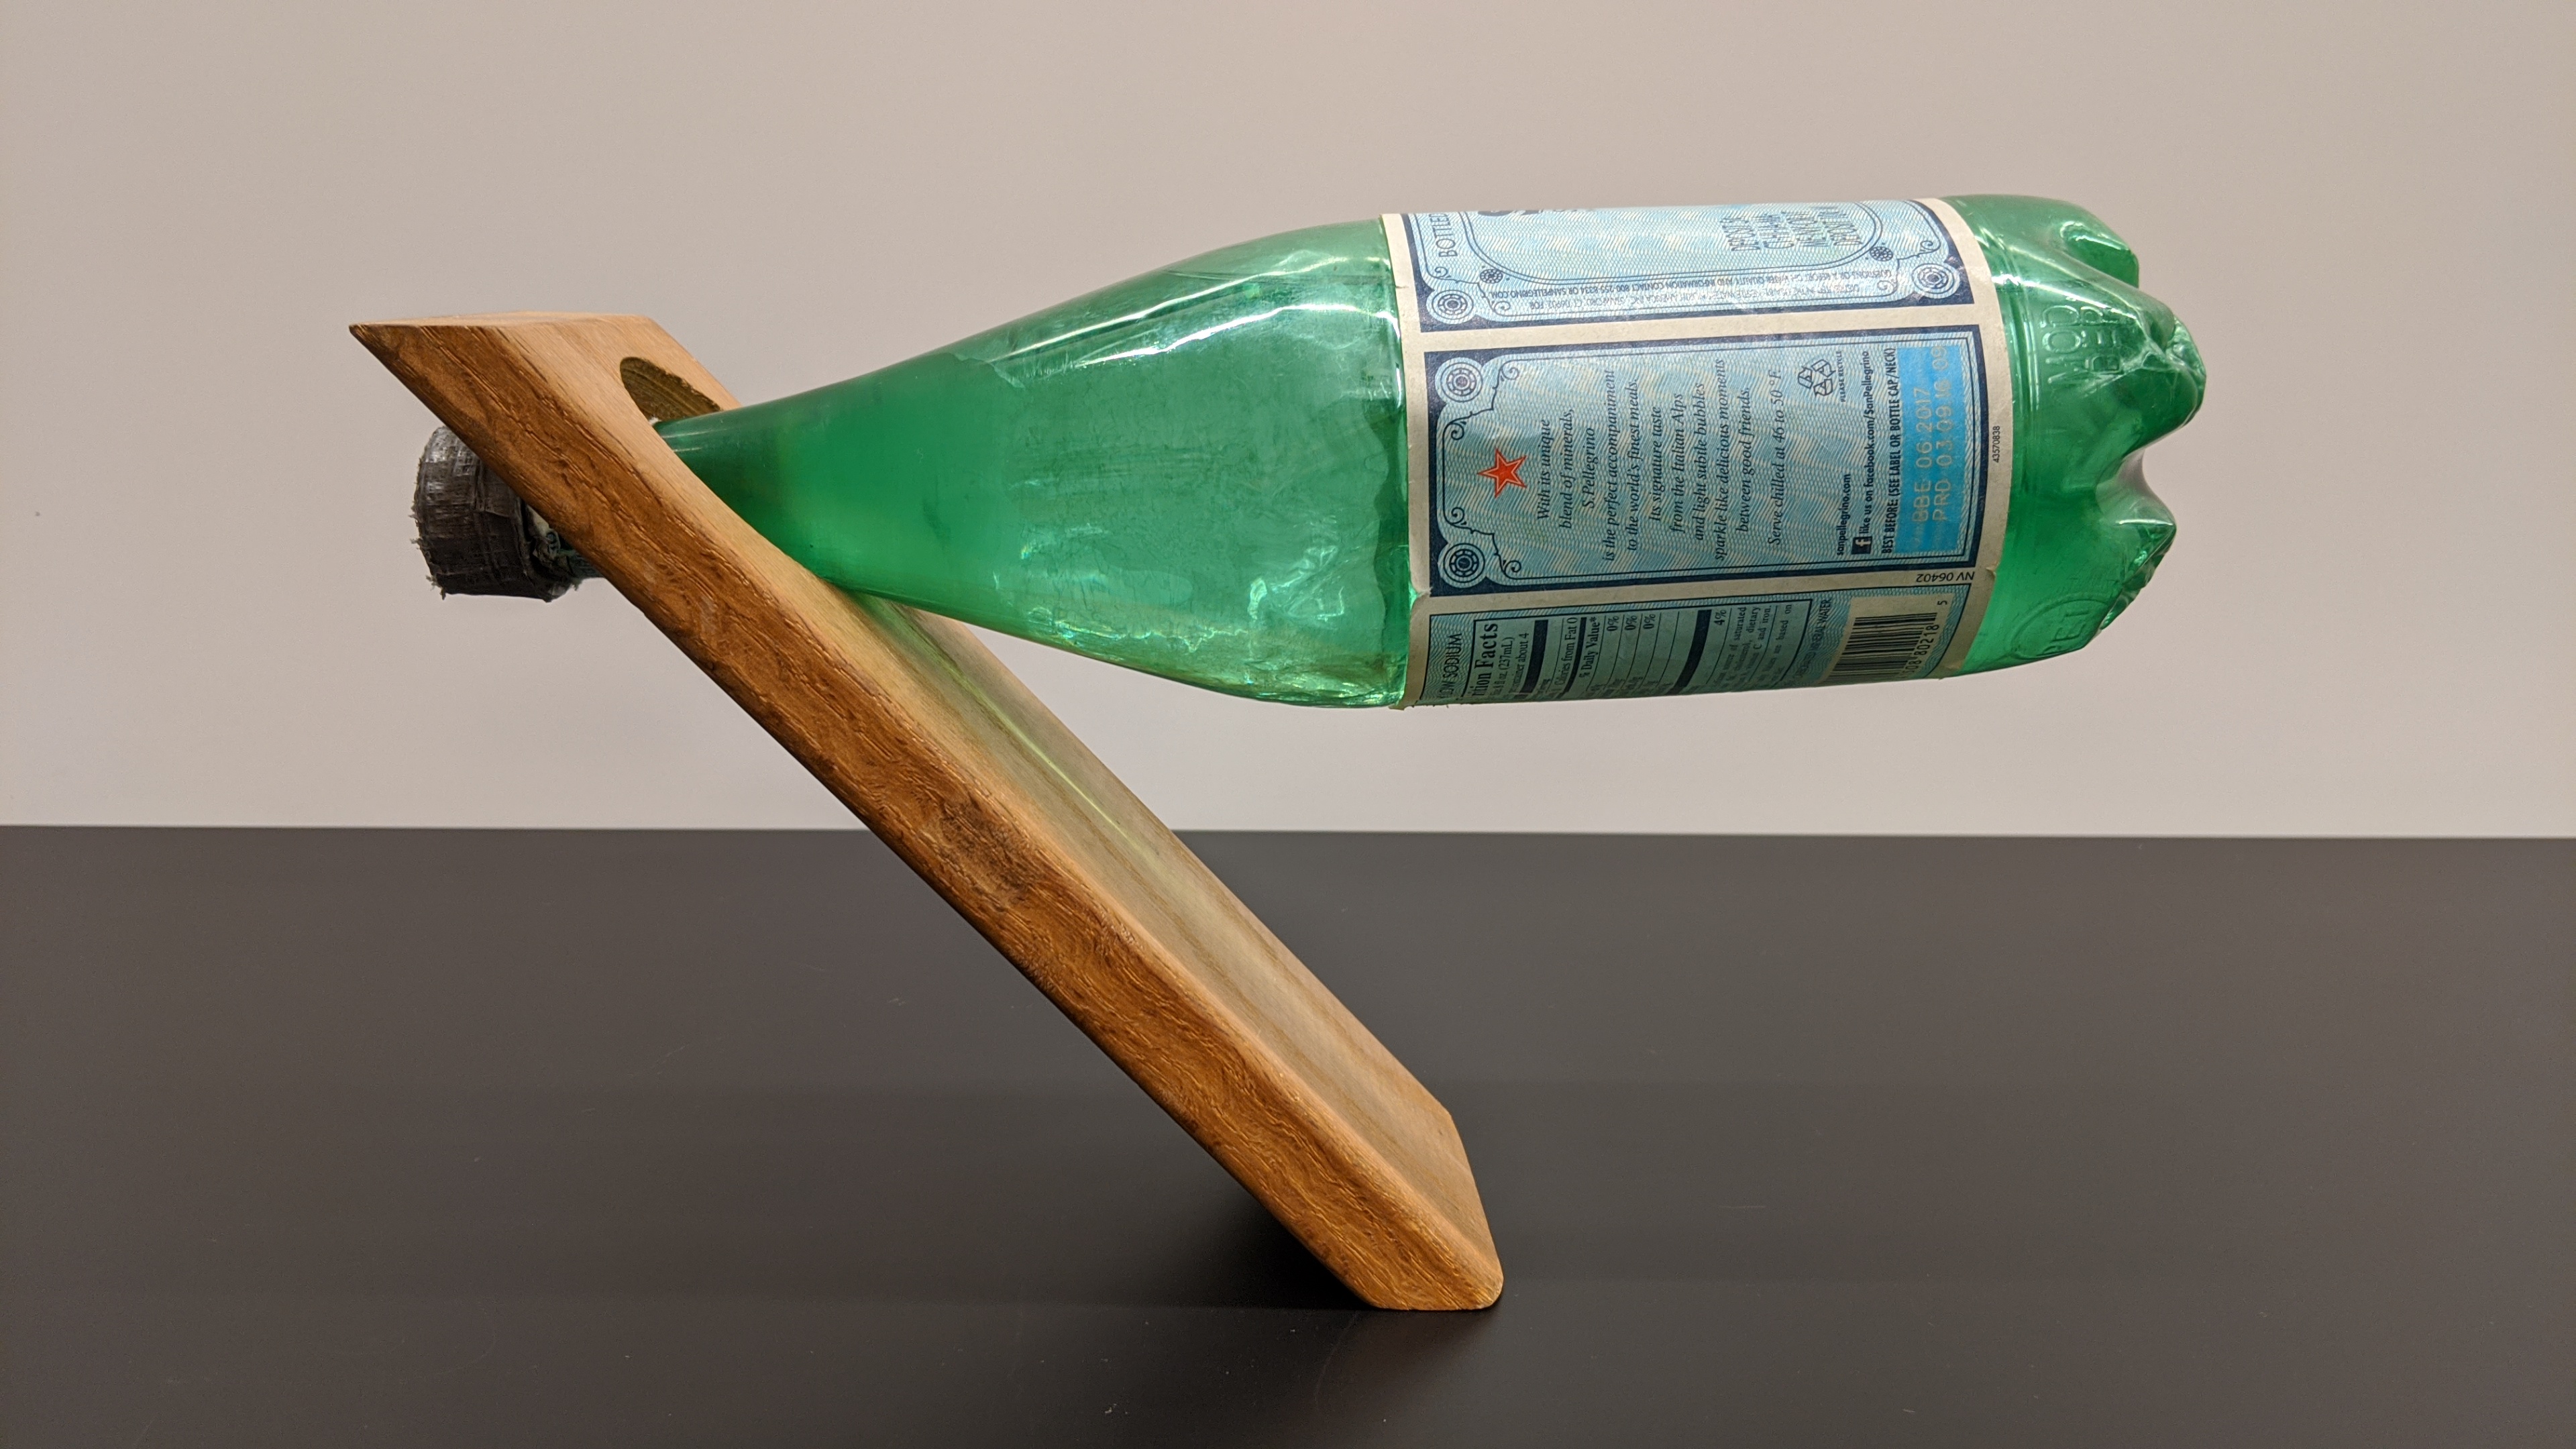 The water bottle's neck is inserted in the hole in the piece of wood, and they balance on the base of the wood